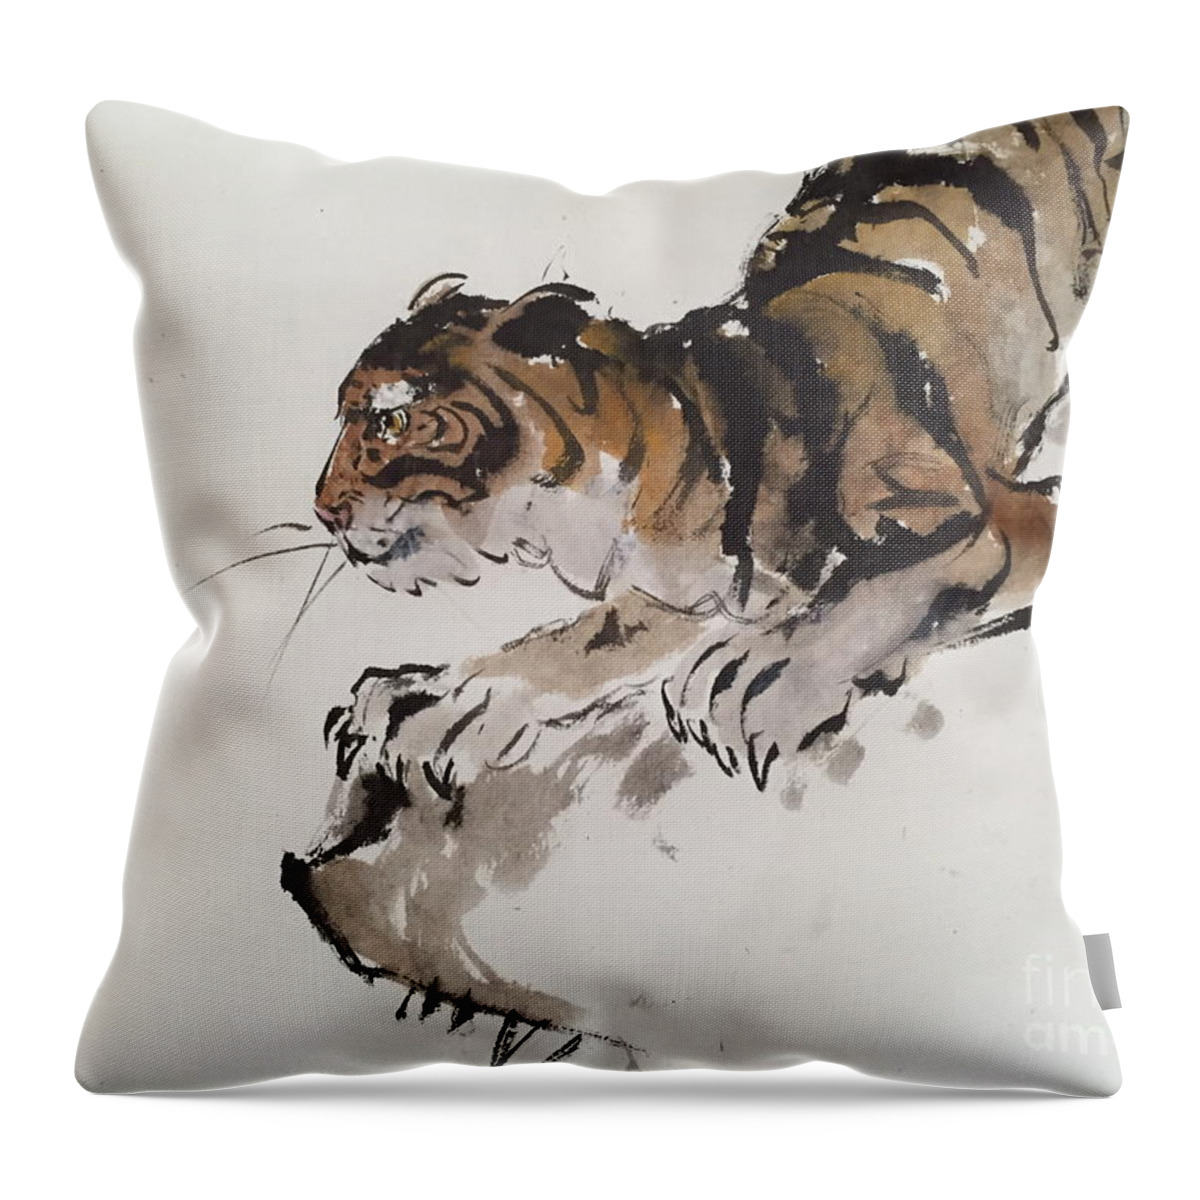  Tiger At Rest Throw Pillow featuring the painting Tiger At Rest by Fereshteh Stoecklein